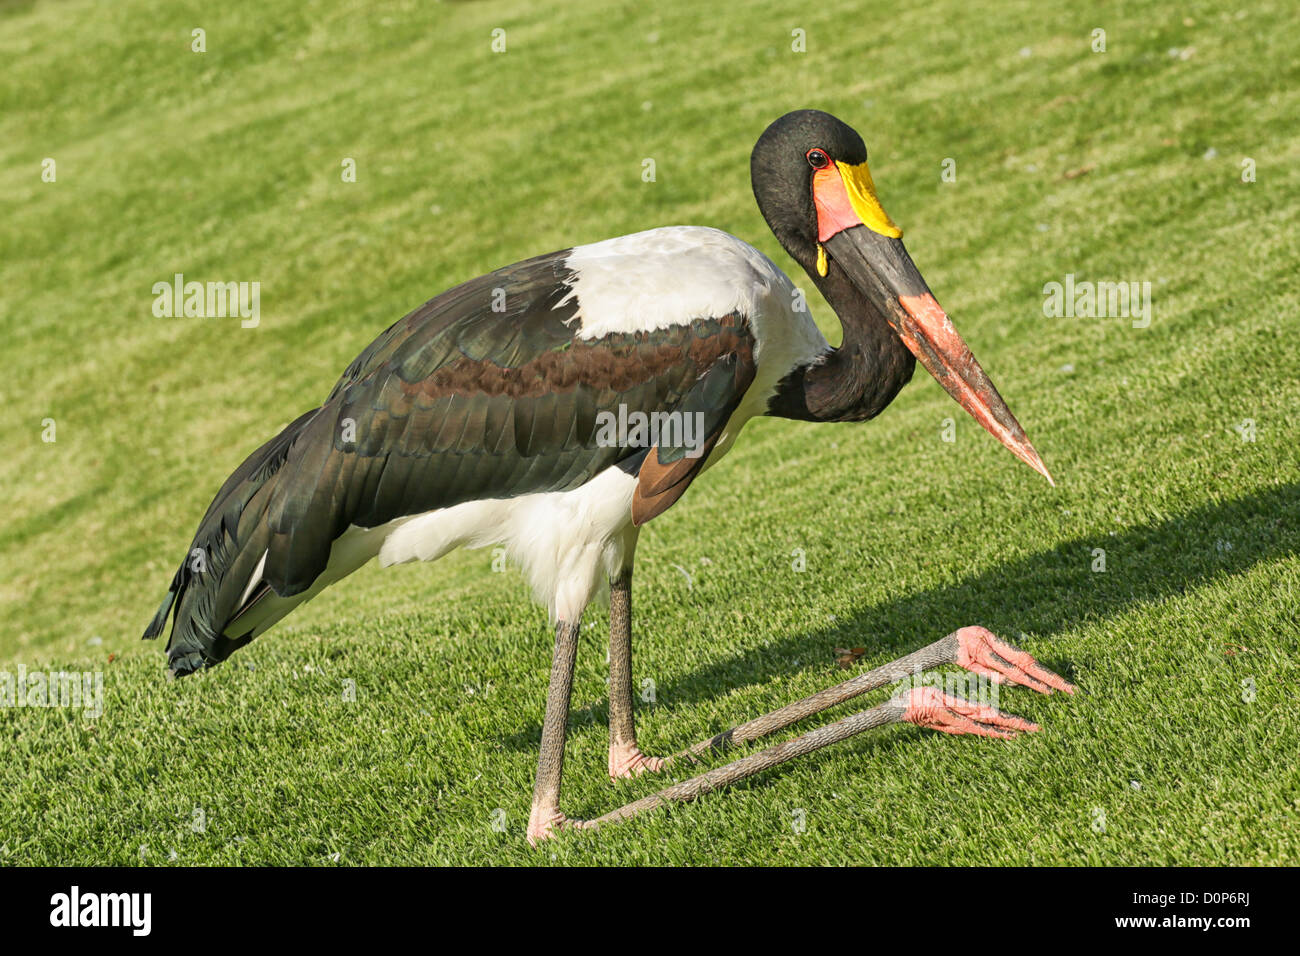 A crane kneeling down with its knee bent backwards Stock Photo